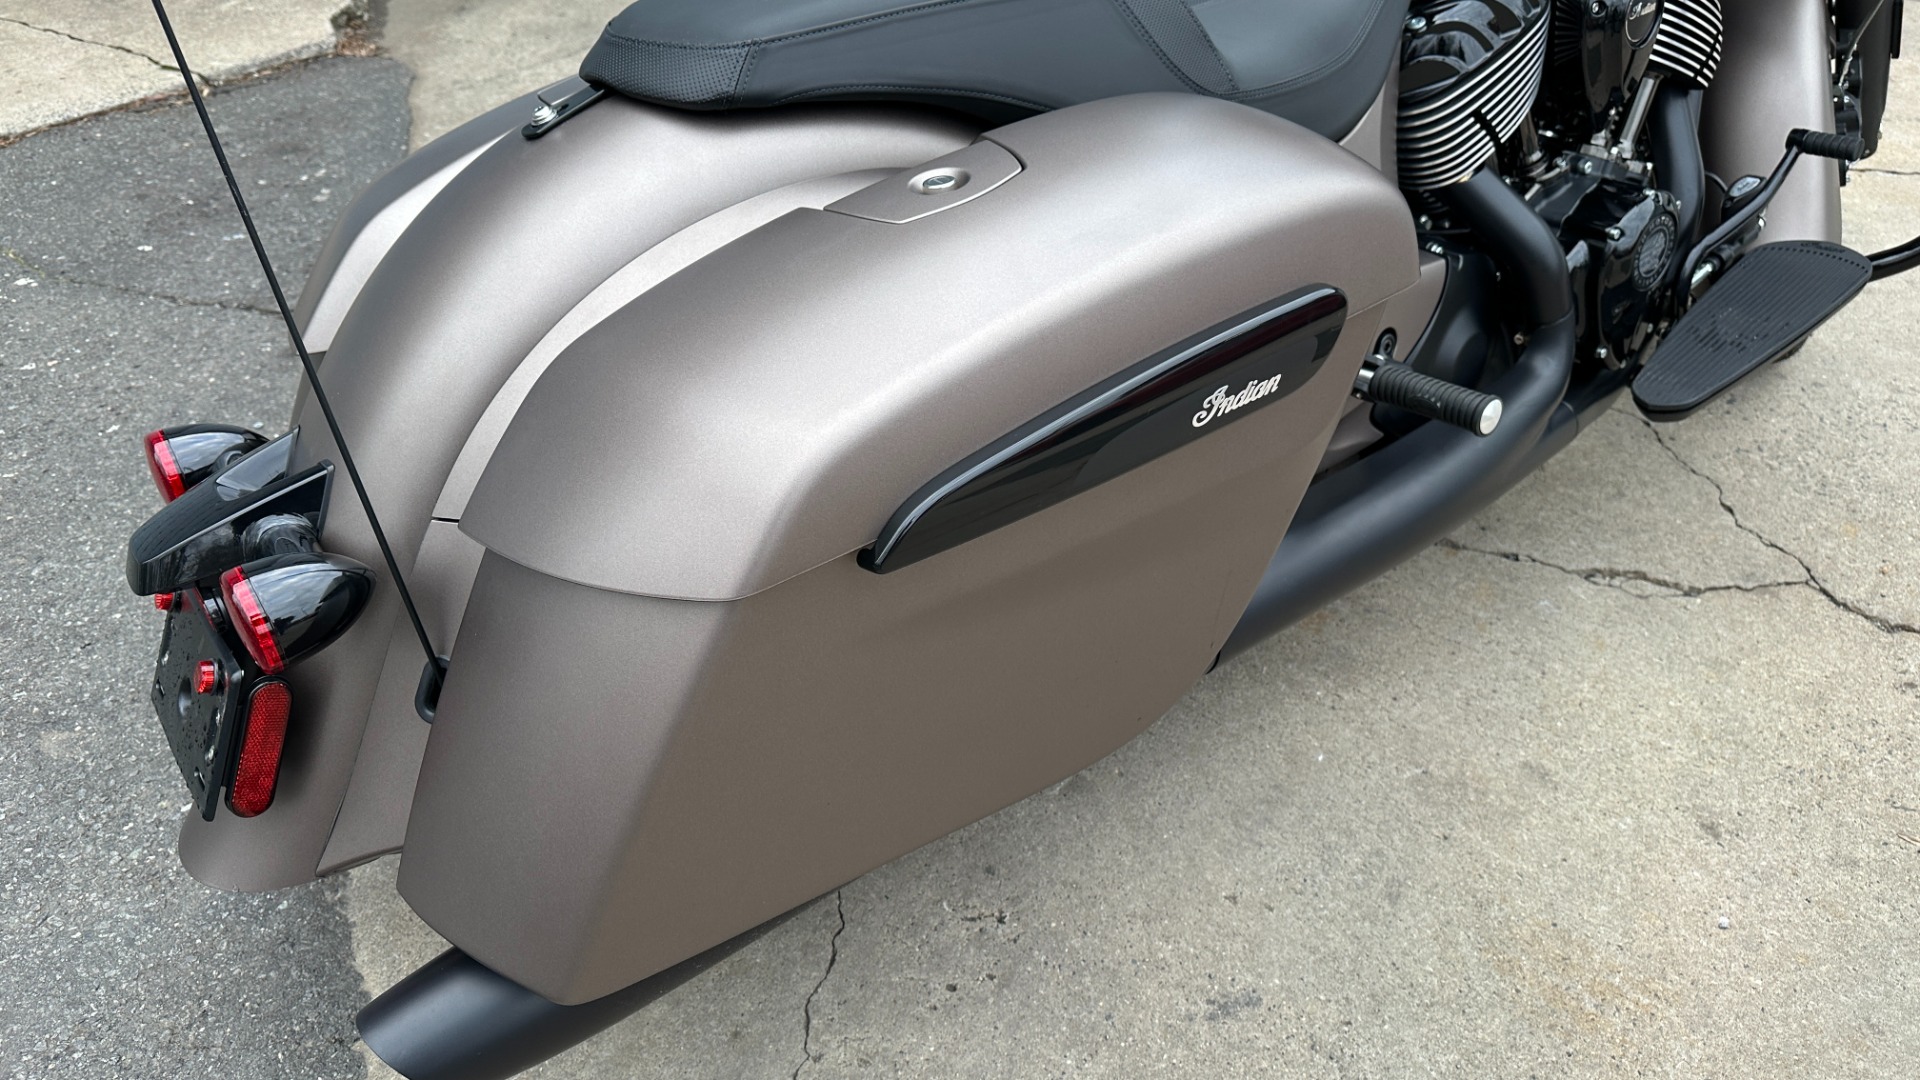 Used 2019 INDIAN CHIEFTAIN DARK HORSE / MATTE PAINT / LOW MILES / NAV / CRUISE CONTROL / TOUCHSCREEN for sale $23,999 at Formula Imports in Charlotte NC 28227 9